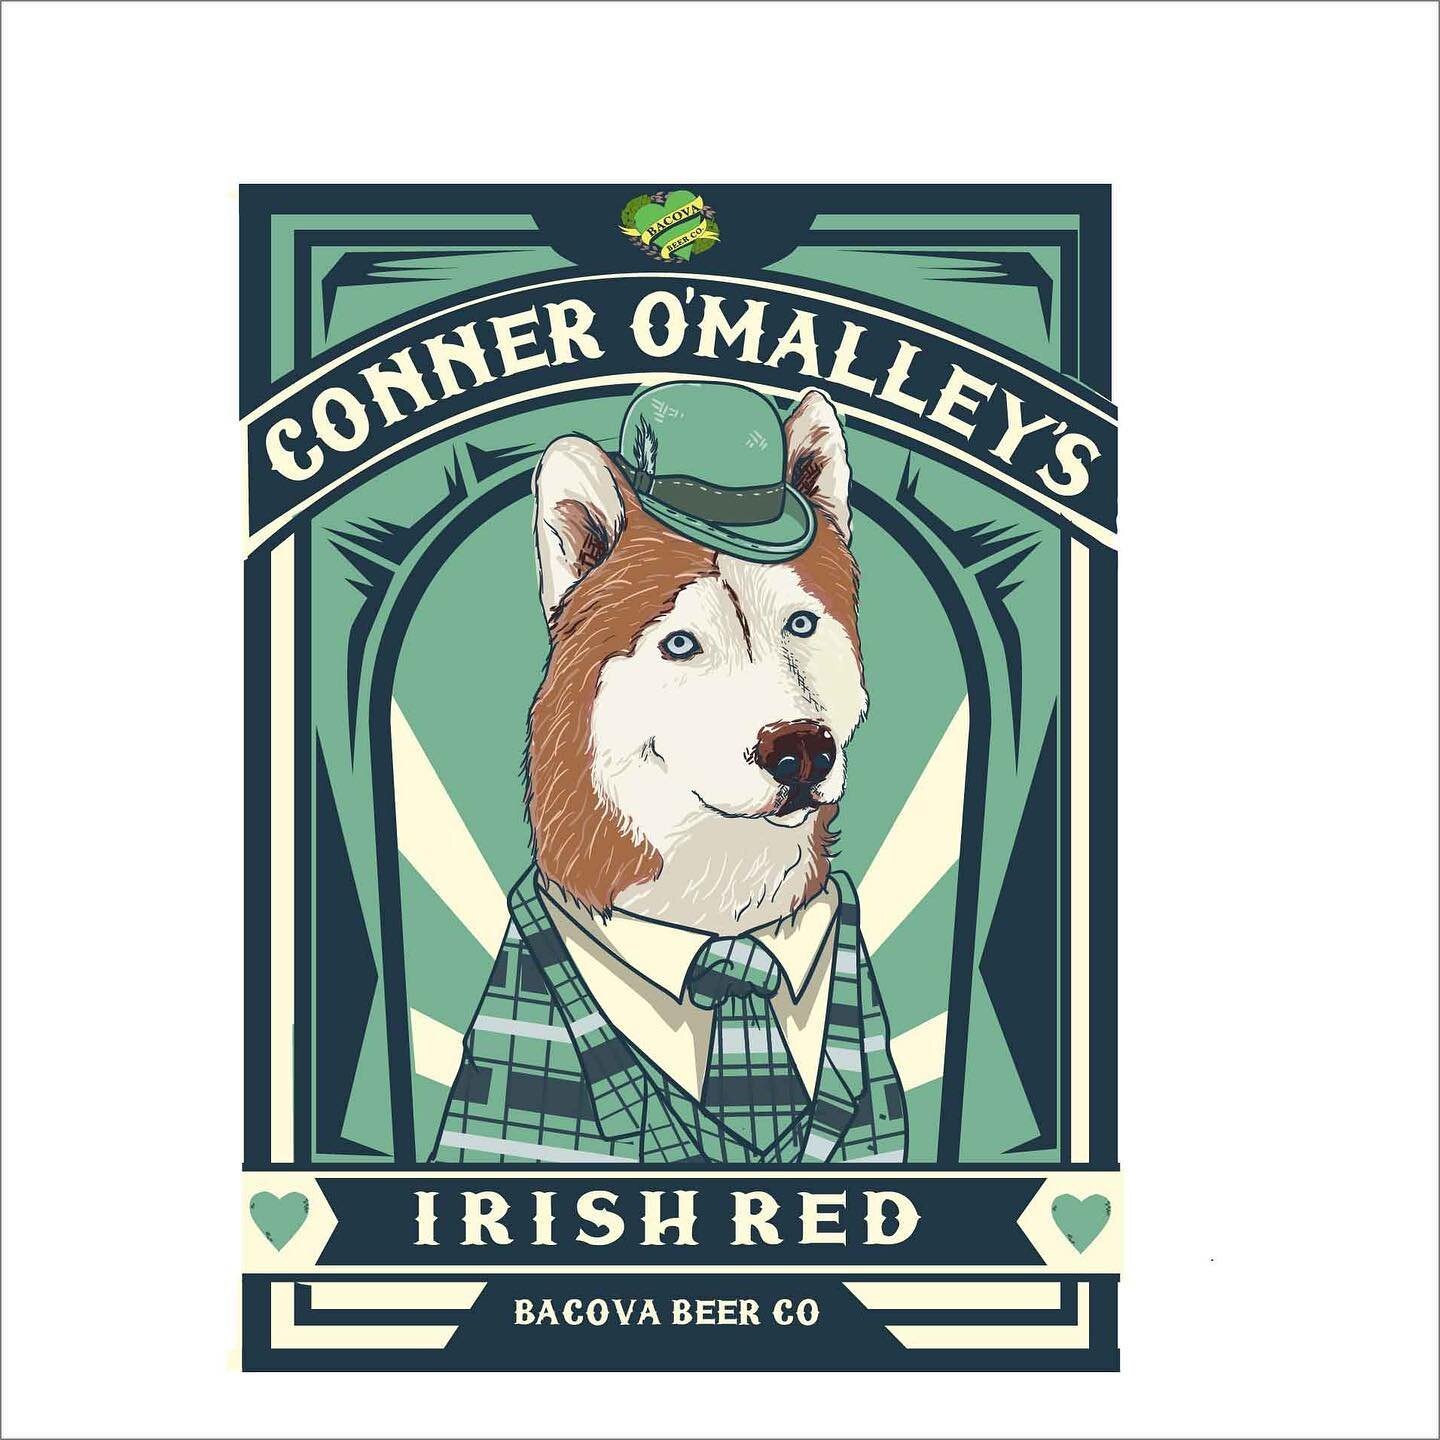 Sad news today at Bacova Beer. Today we lost our friend and mascot Conner O&rsquo;Malley. In honor of his life, we are having special pint pricing on Conner O&rsquo;Malley&rsquo;s Irish Red Ale today only. Stop in and toast our pup. We&rsquo;ll miss 